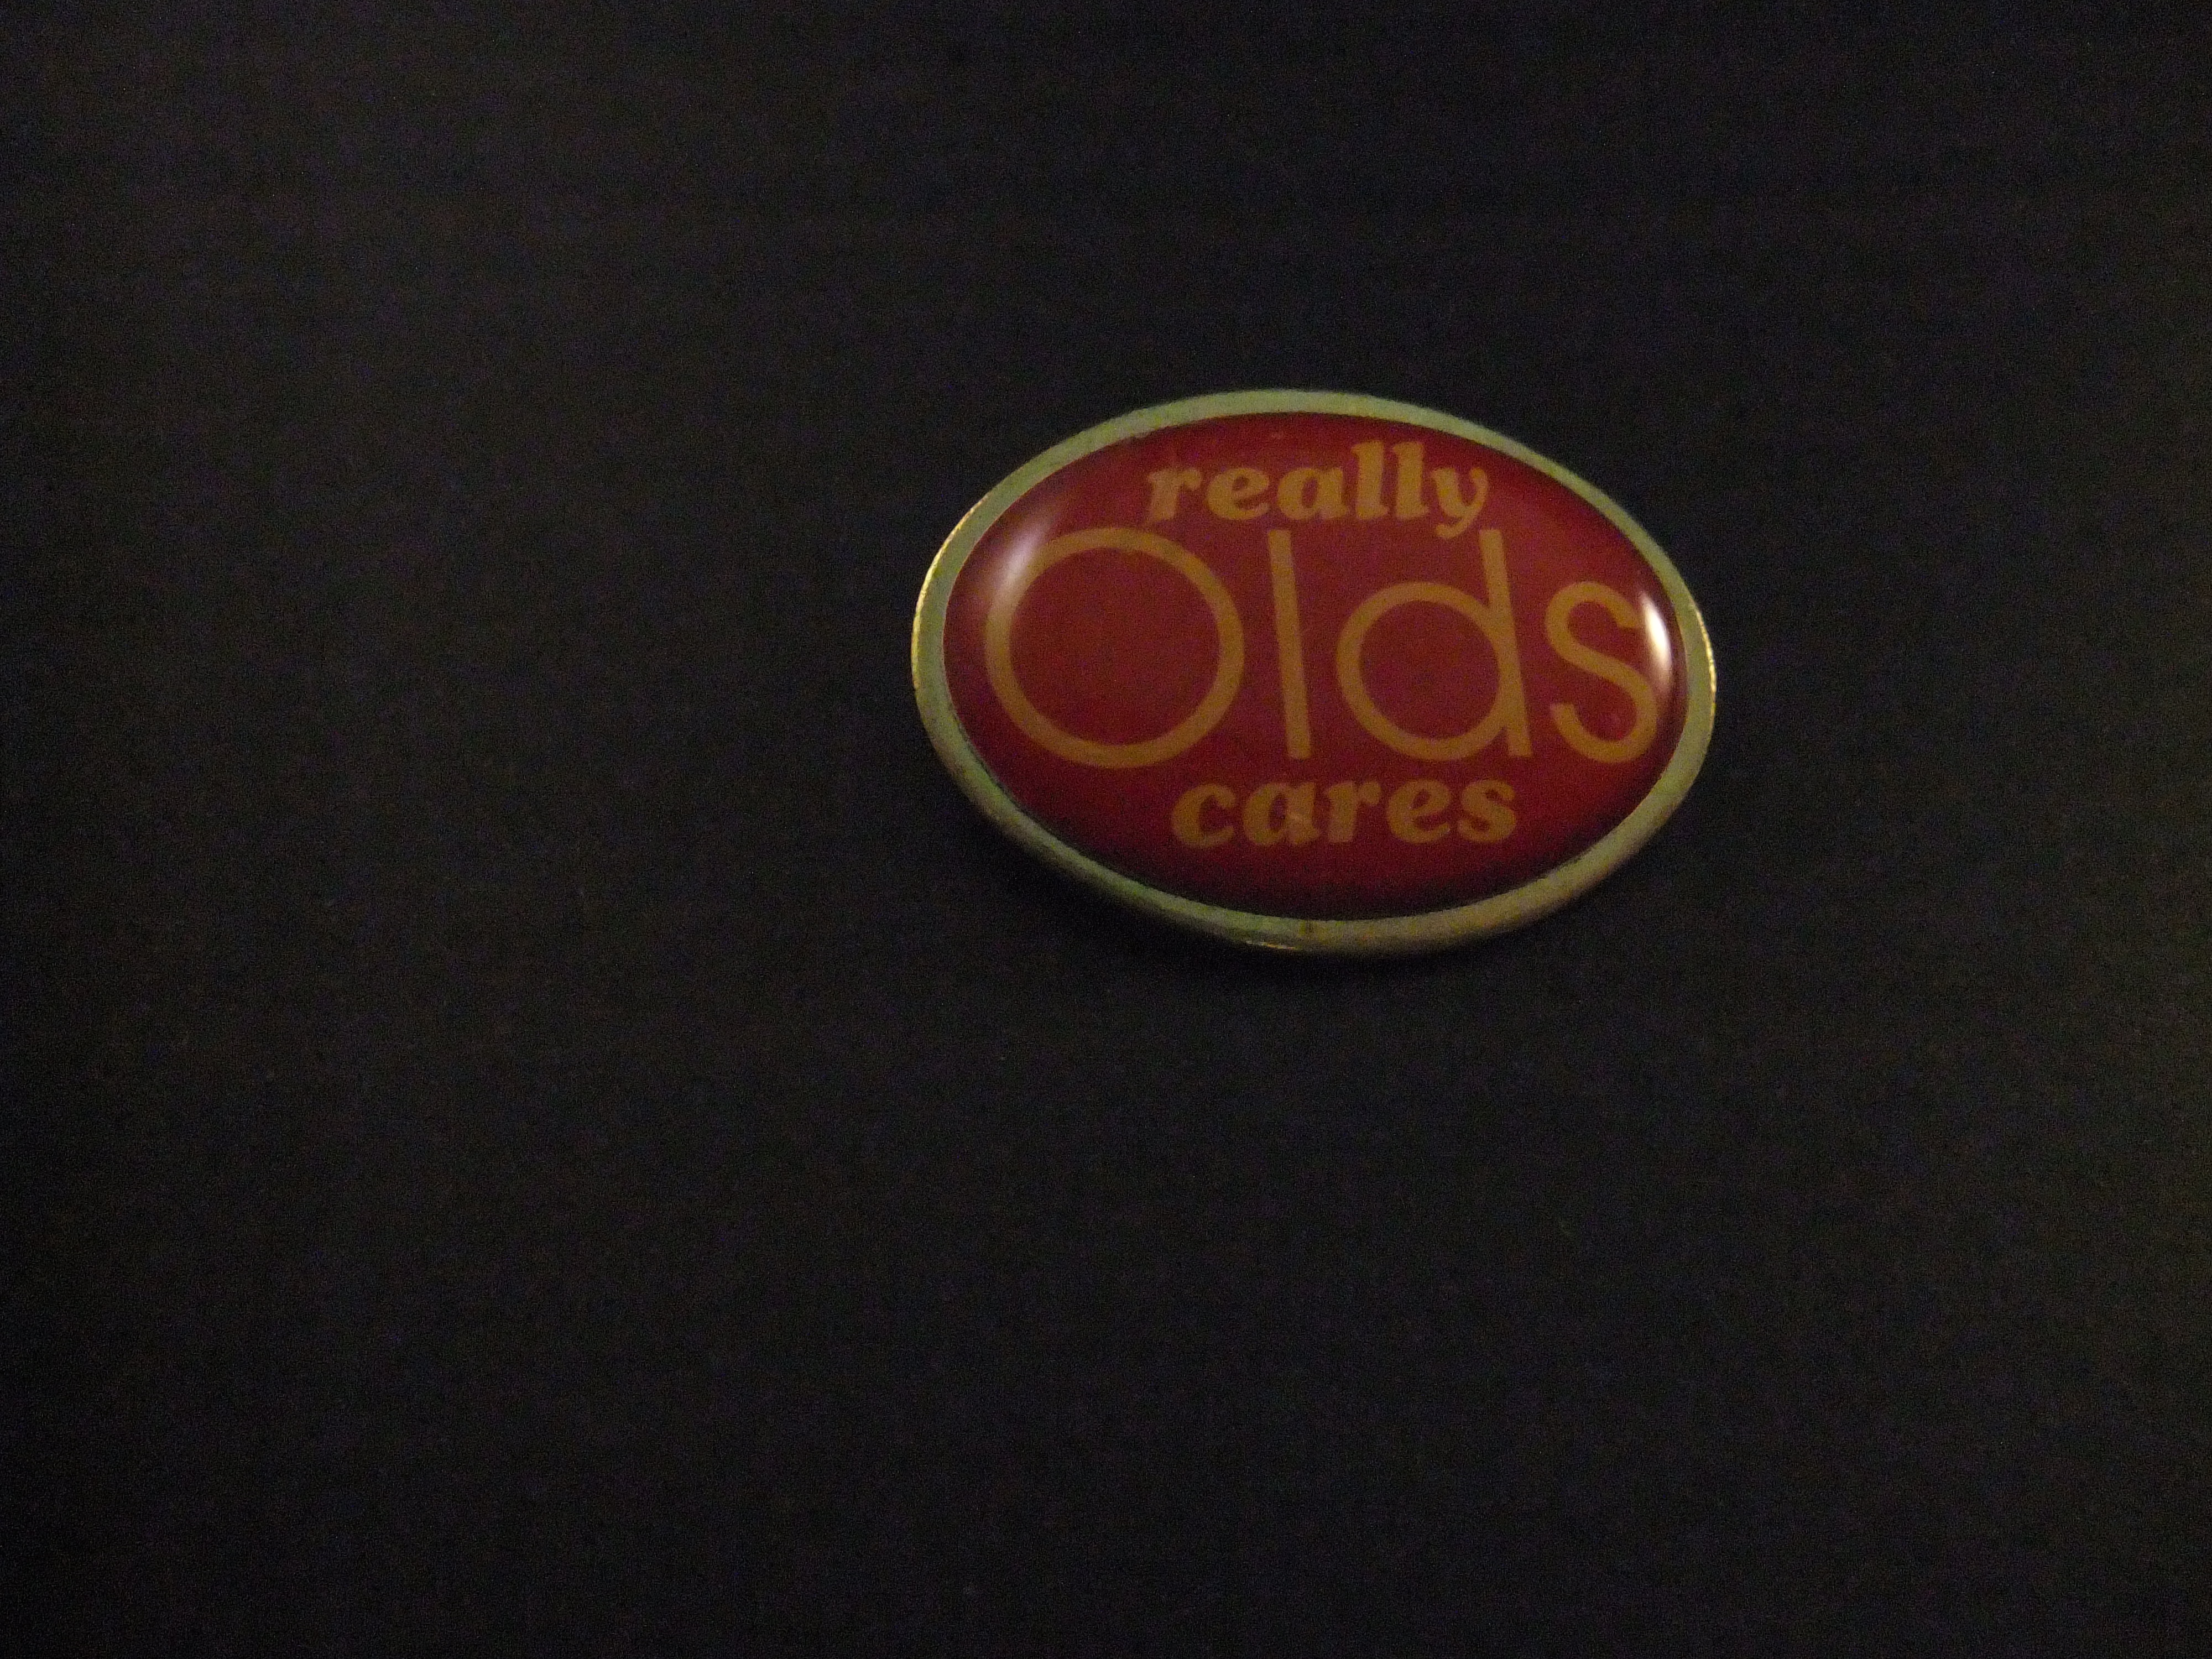 Really Old Cares (NHS (National Health Services) Great Britain. gezondheidszorg Engeland